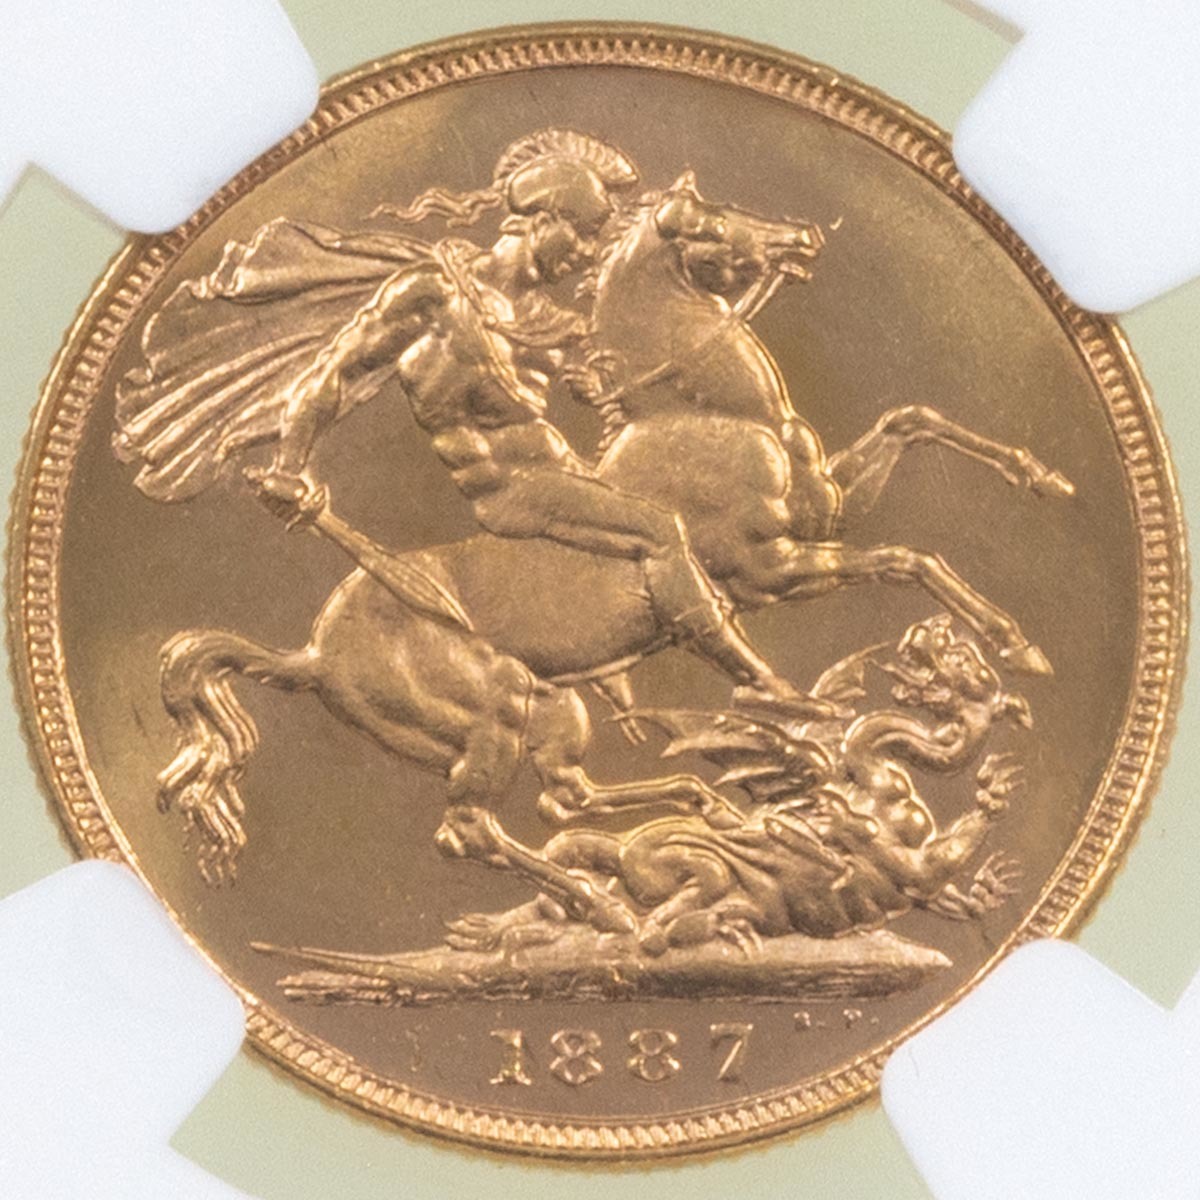 1887 Queen Victoria Gold Full Sovereign Melbourne Australia Mint NGC Graded MS 63 Reverse